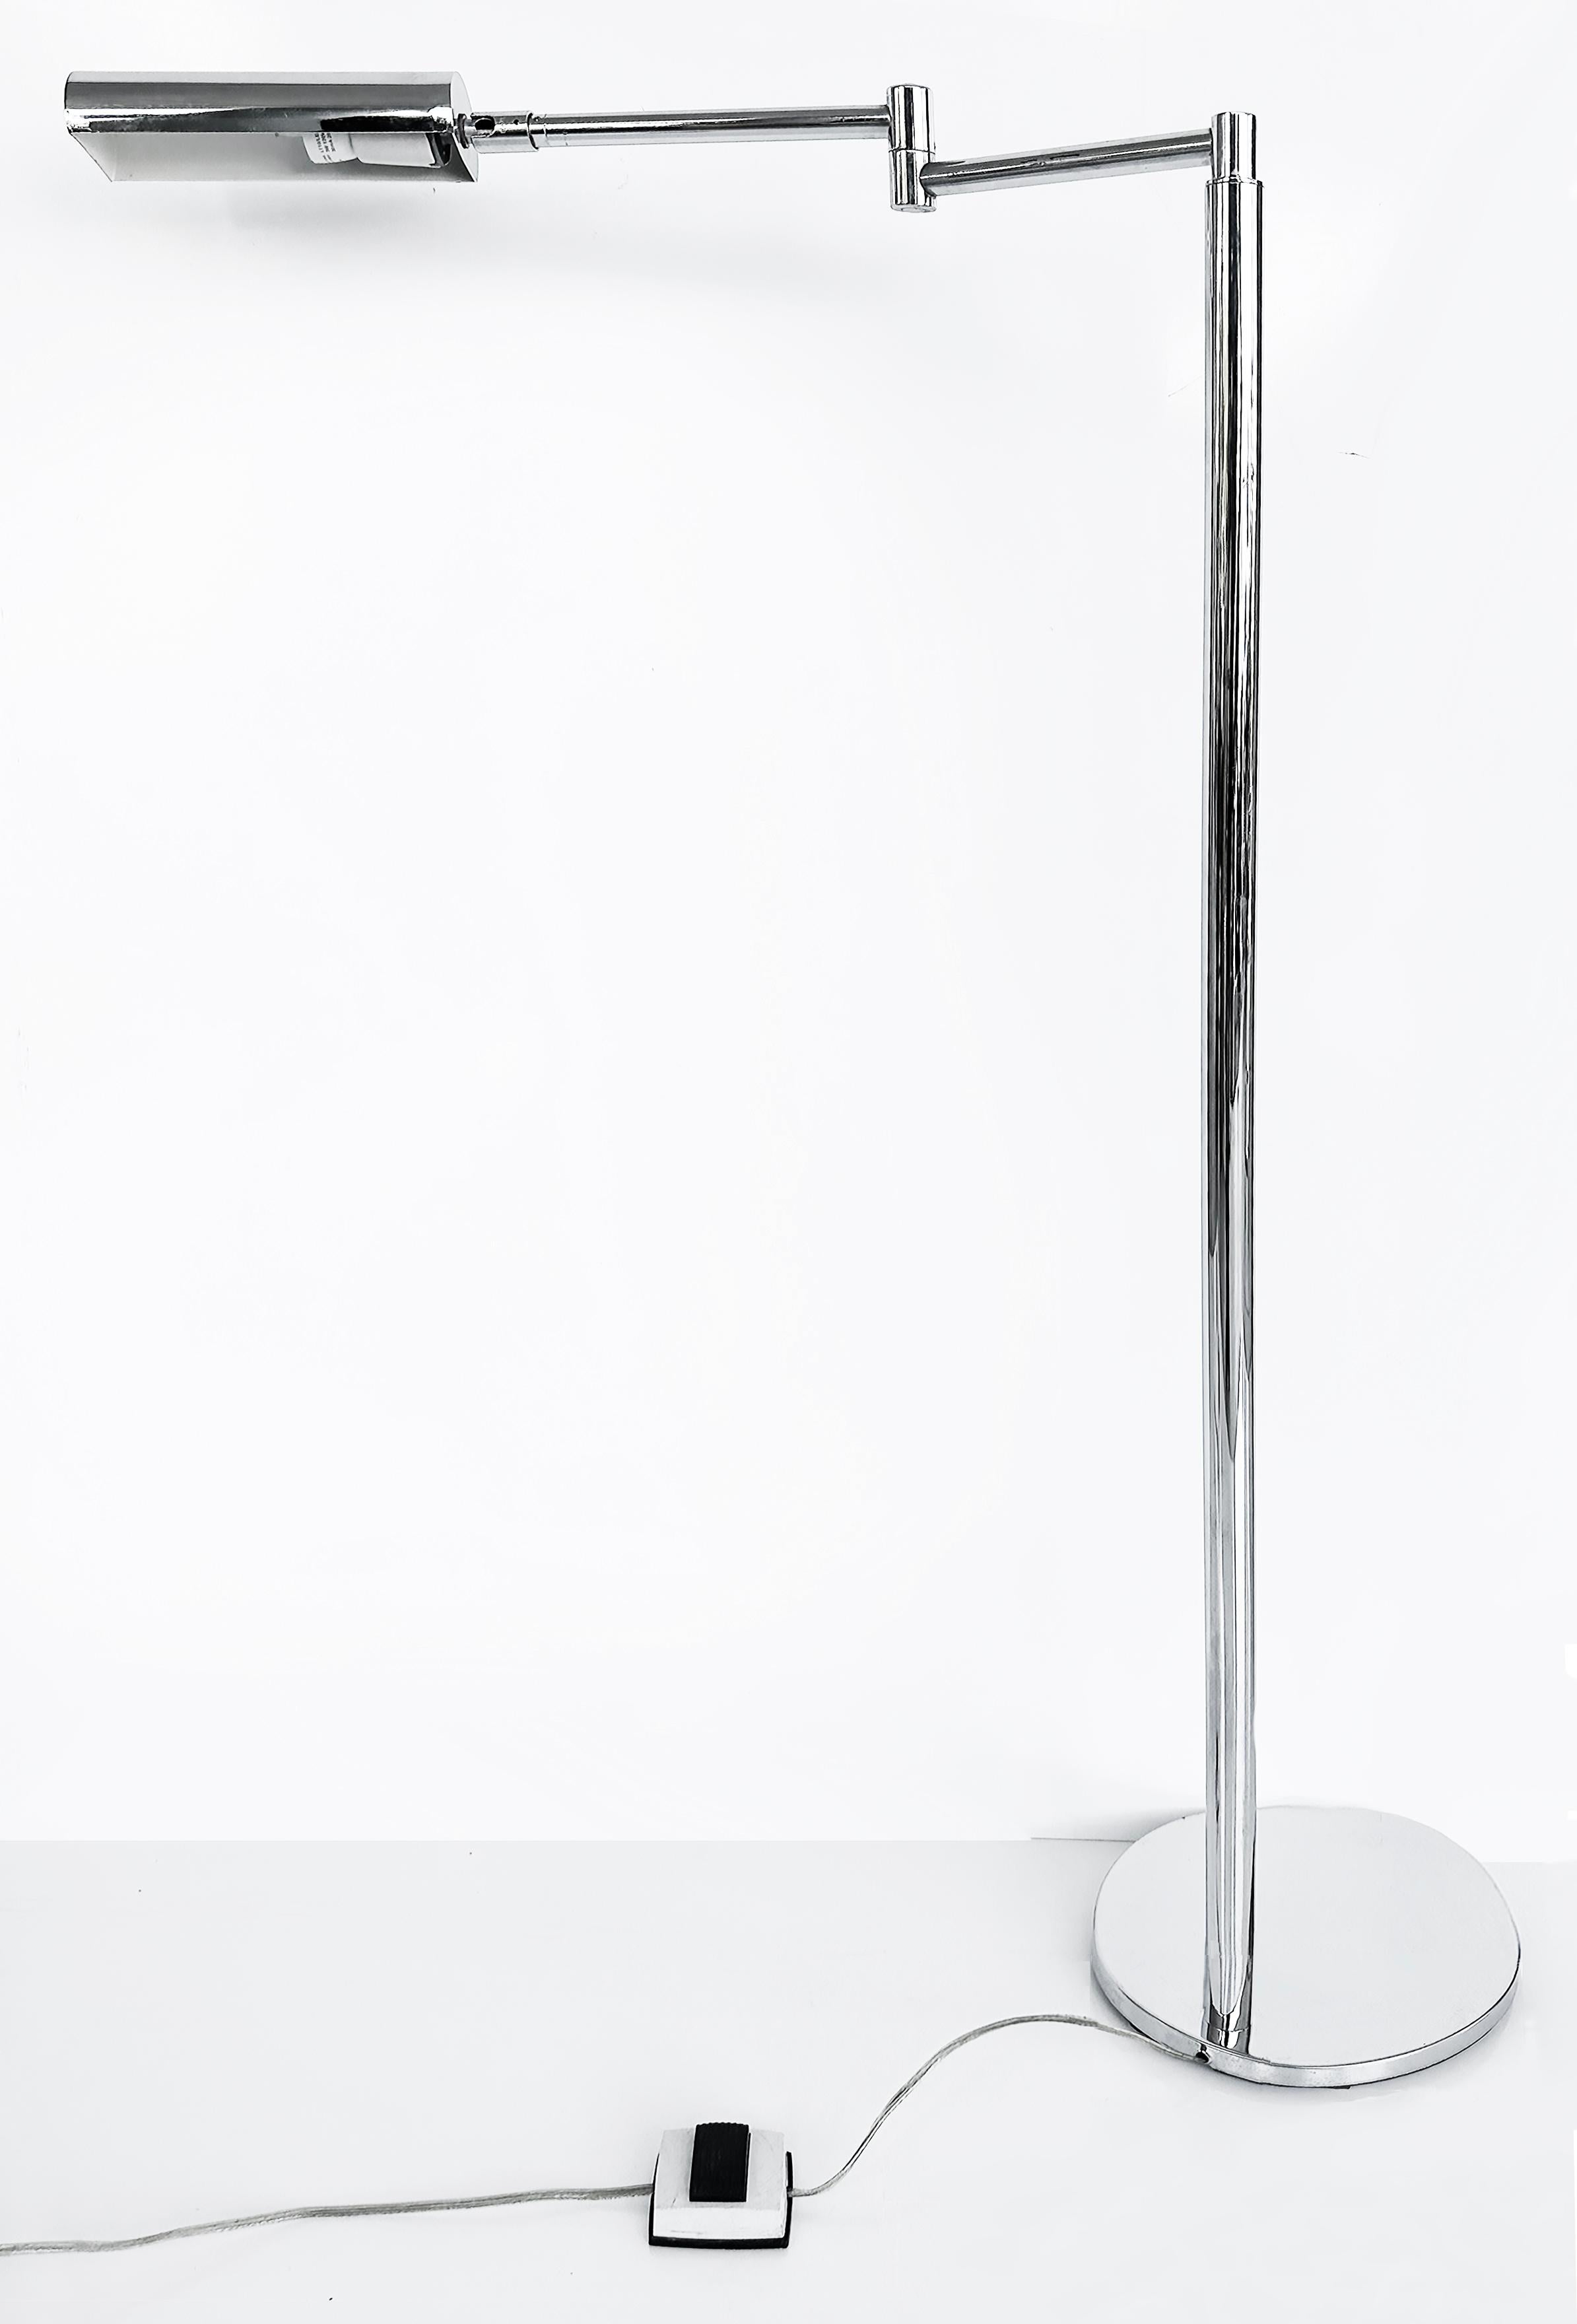 Koch & Lowy Adjustable Swing Arm Chrome Floor Lamp OMI, 1960s

Offered for sale is a chrome swing arm adjustable floor lamp manufactured by Koch & Lowy circa 1960s.  This floor lamp has a single standard porcelain socket and an in-line switch on the